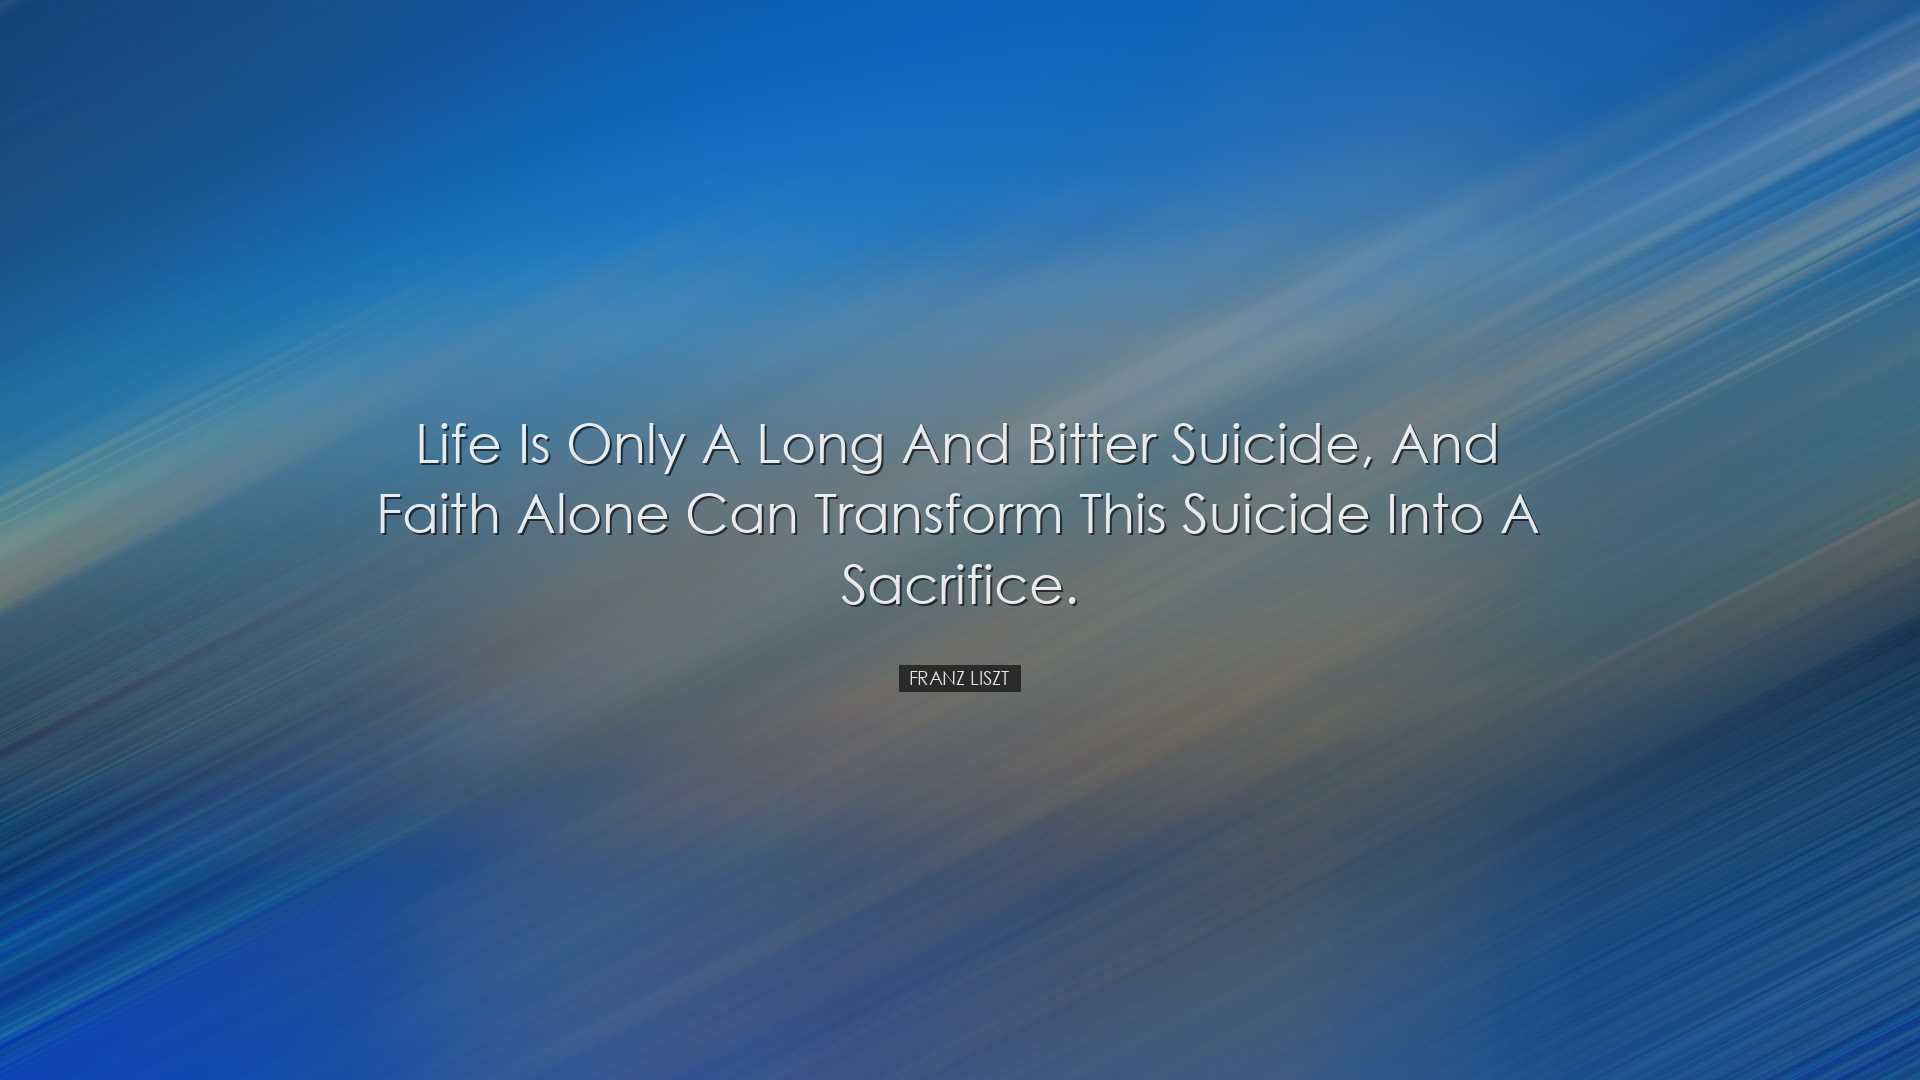 Life is only a long and bitter suicide, and faith alone can transf